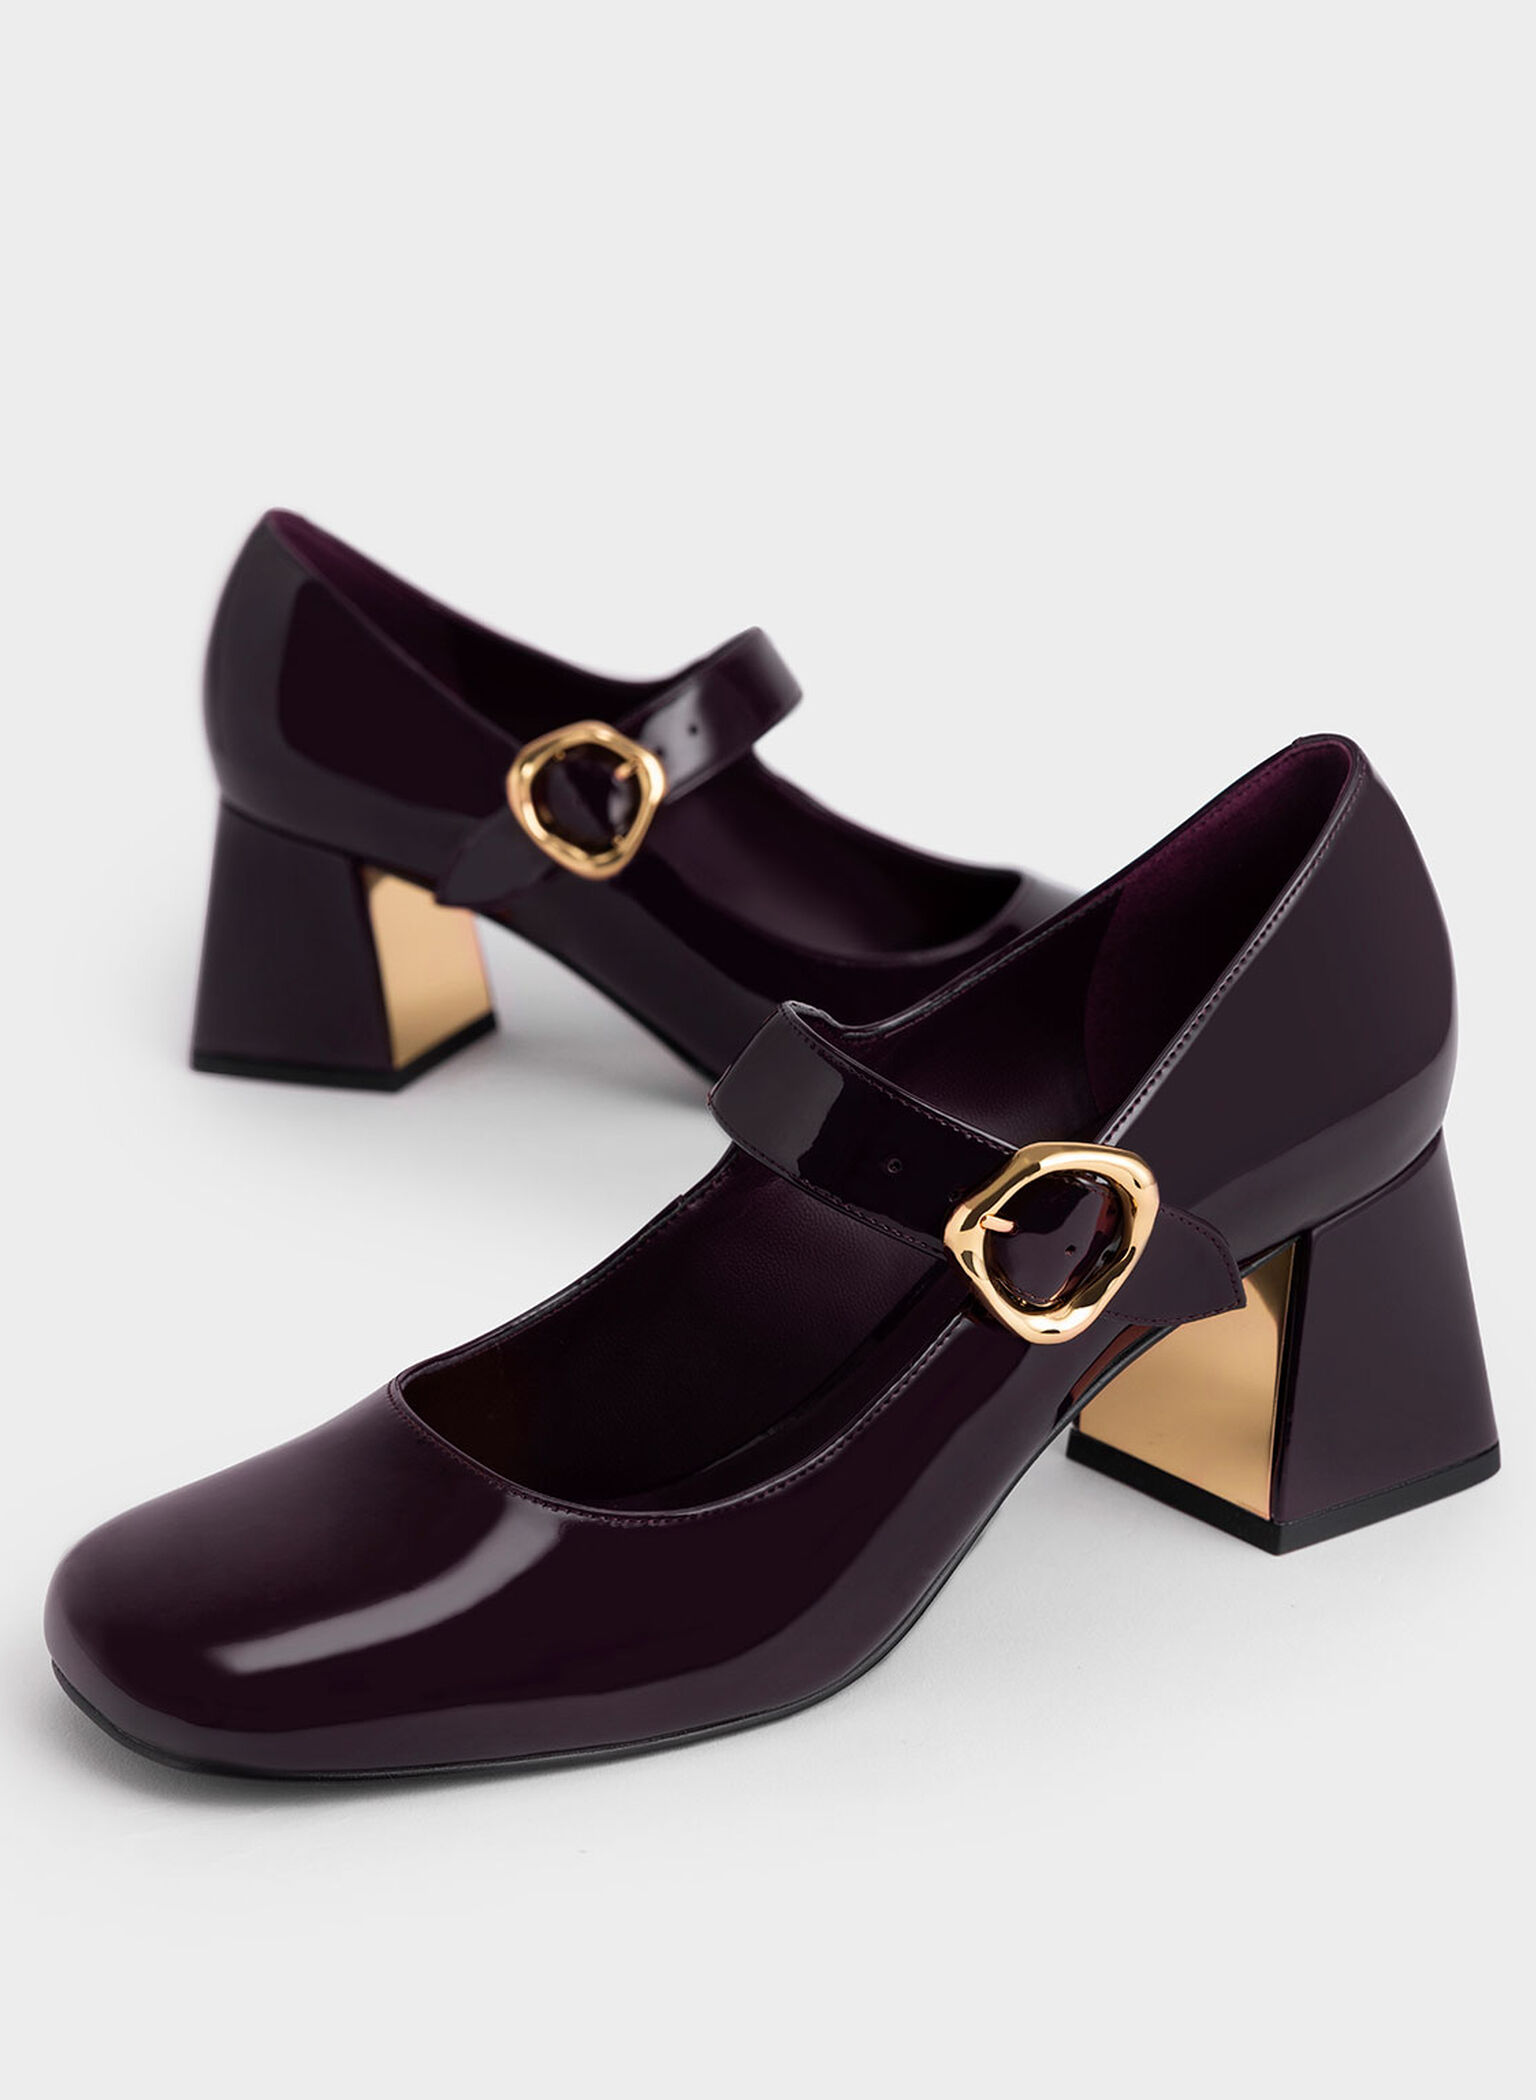 Patent Buckled Mary Jane Pumps, Maroon, hi-res